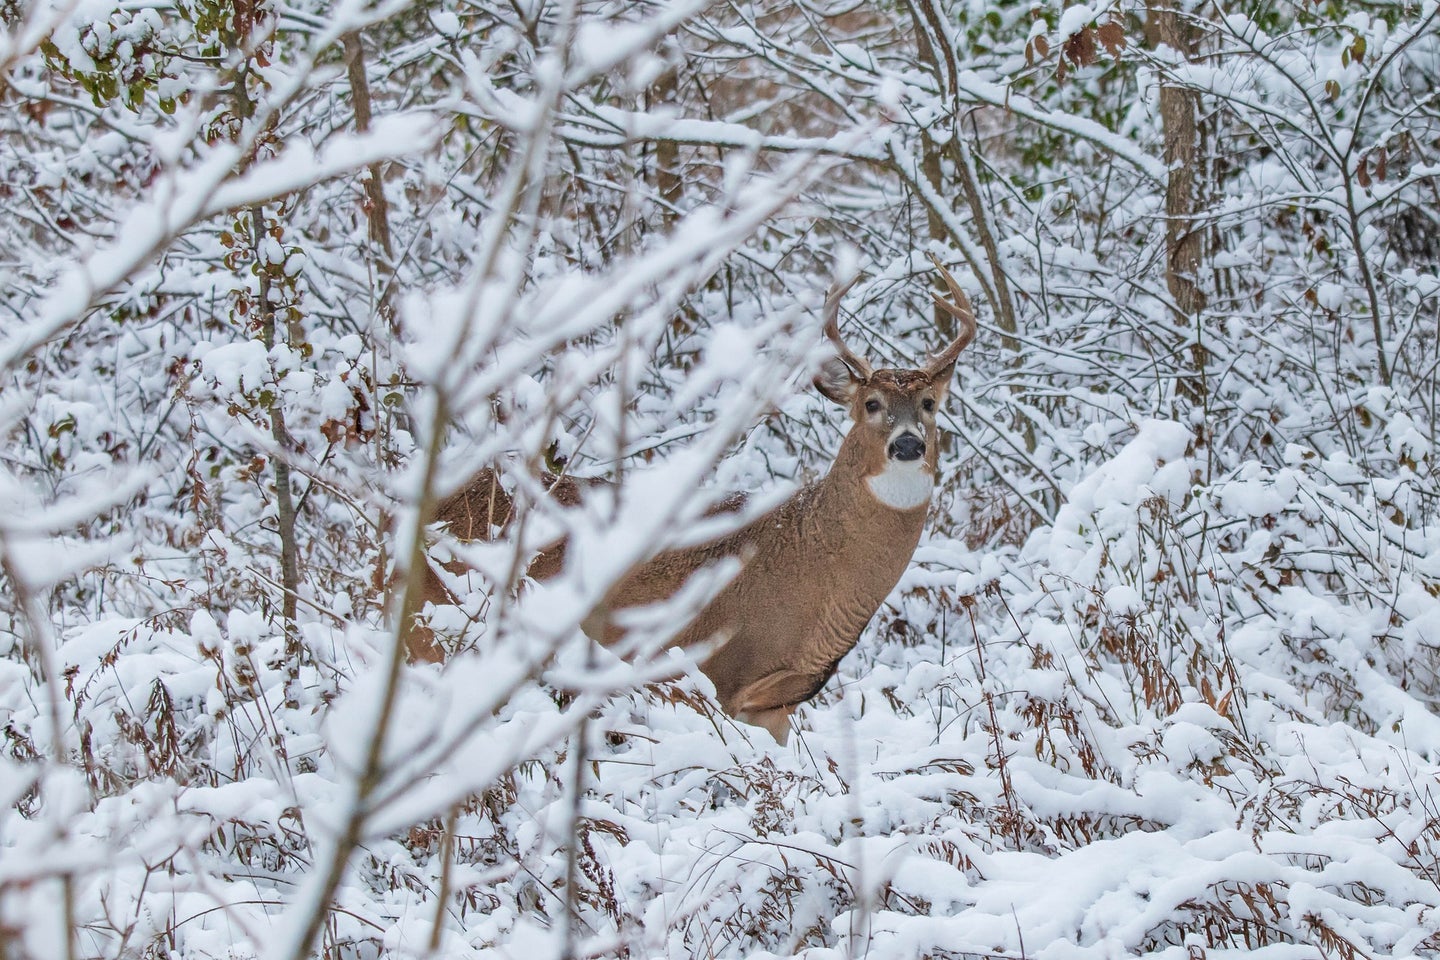 whitetail deer standing in a snowy forest.